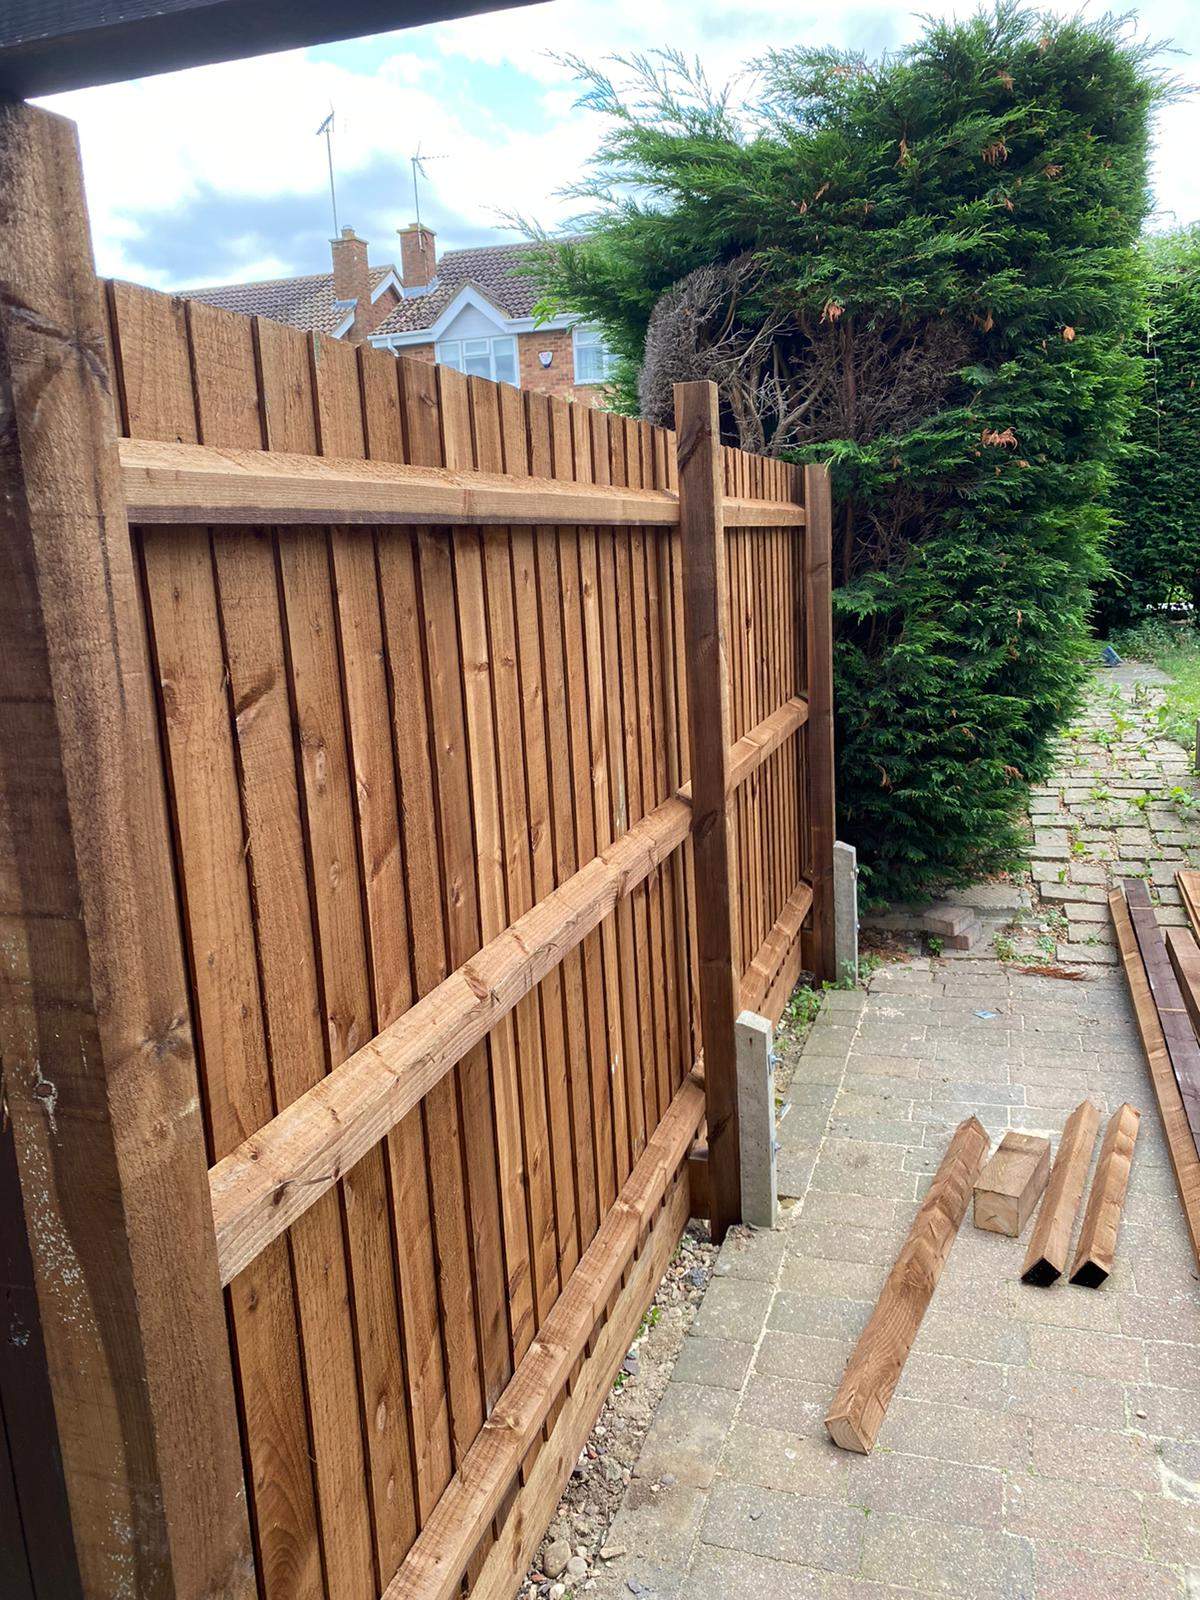 New Featheredge Fencing Installed in Gunthorpe